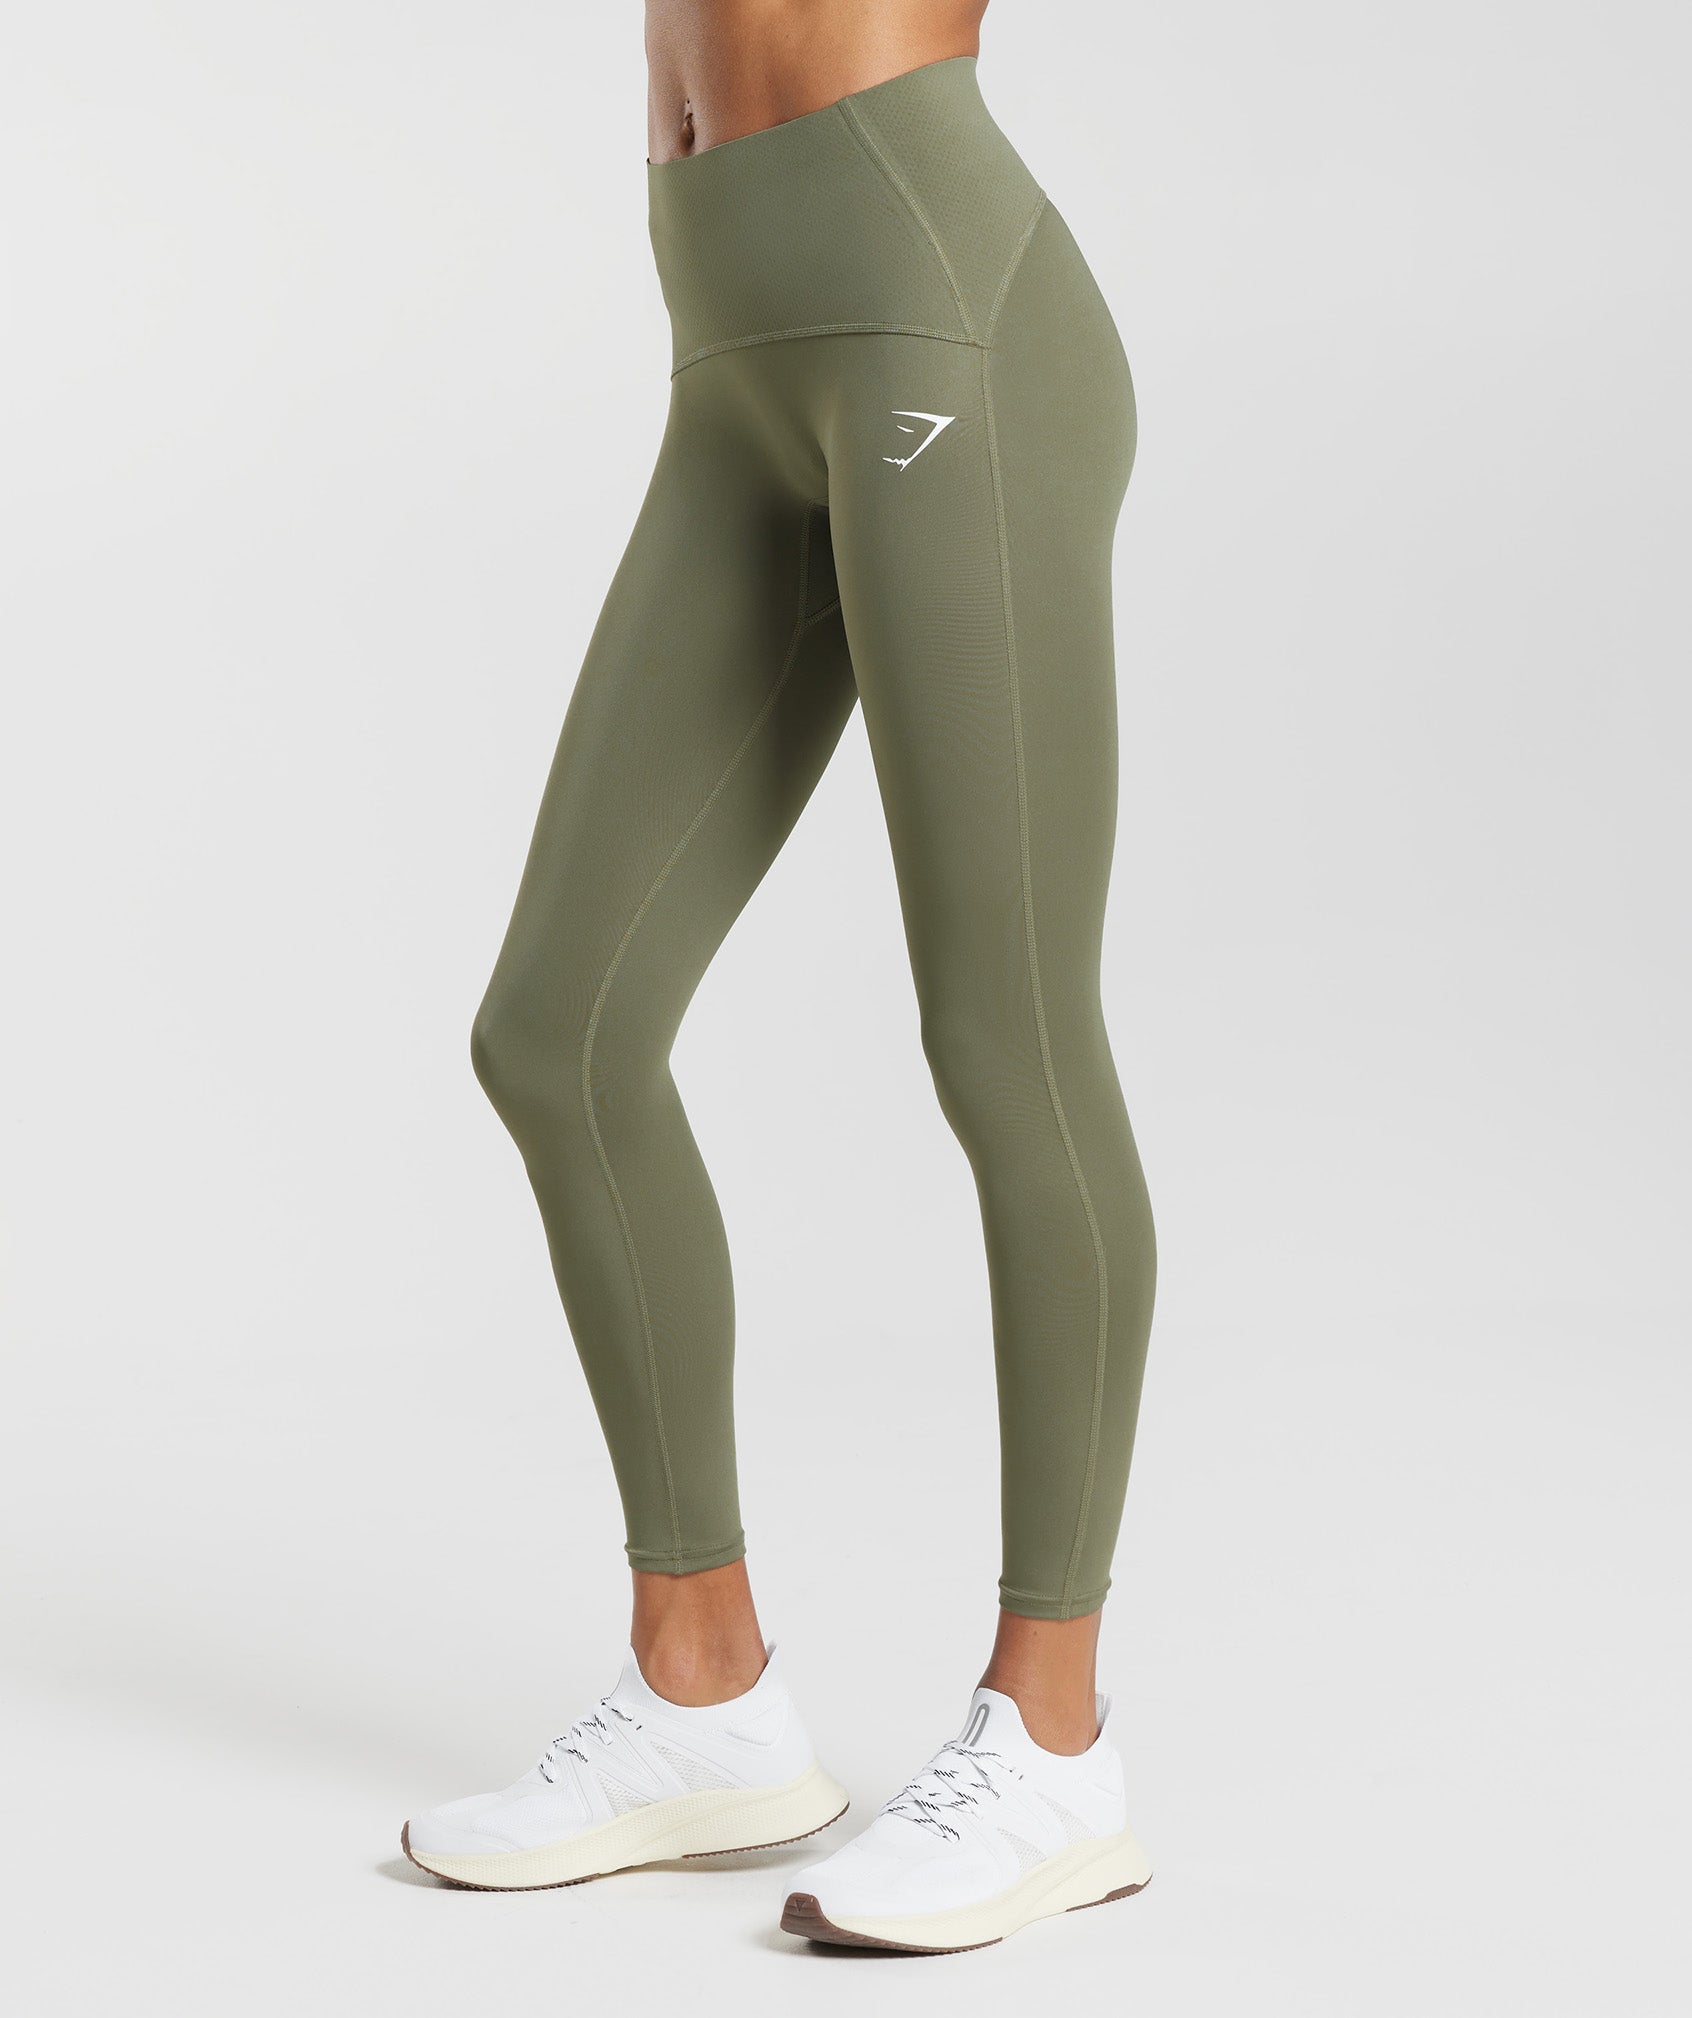 Waist Support Leggings in Dusty Olive - view 3